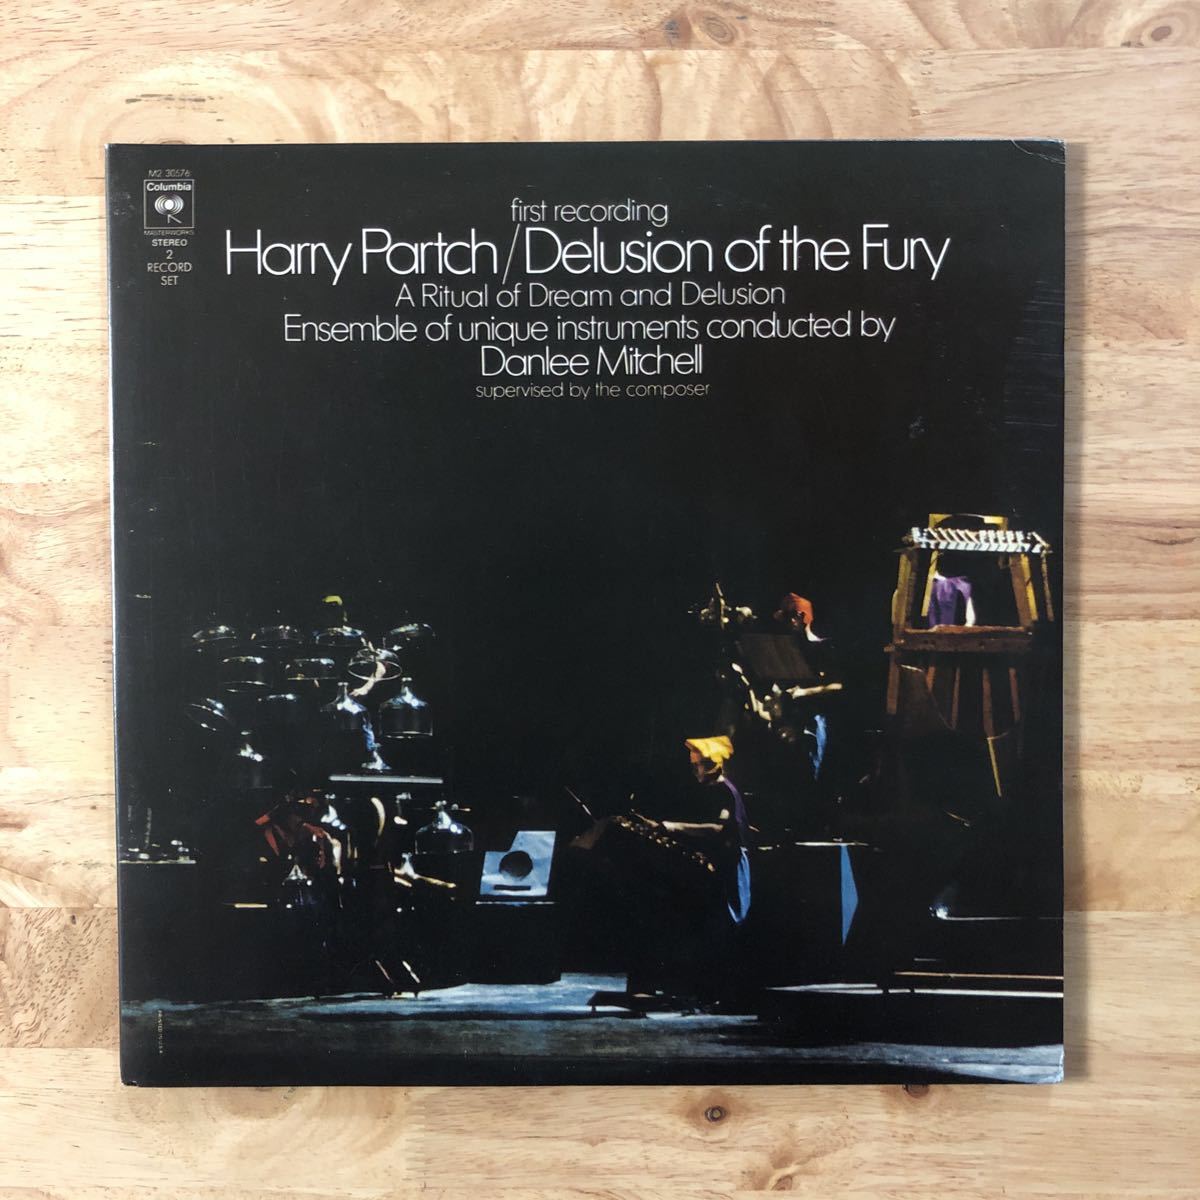 LP 自作楽器~辺境音楽の秘宝 HARRY PARTCH/DELUSION OF THE FURY - A RITUAL OF DREAM AND DELUSION[US盤:'71年作(09年リイシュー):2LP]_画像1